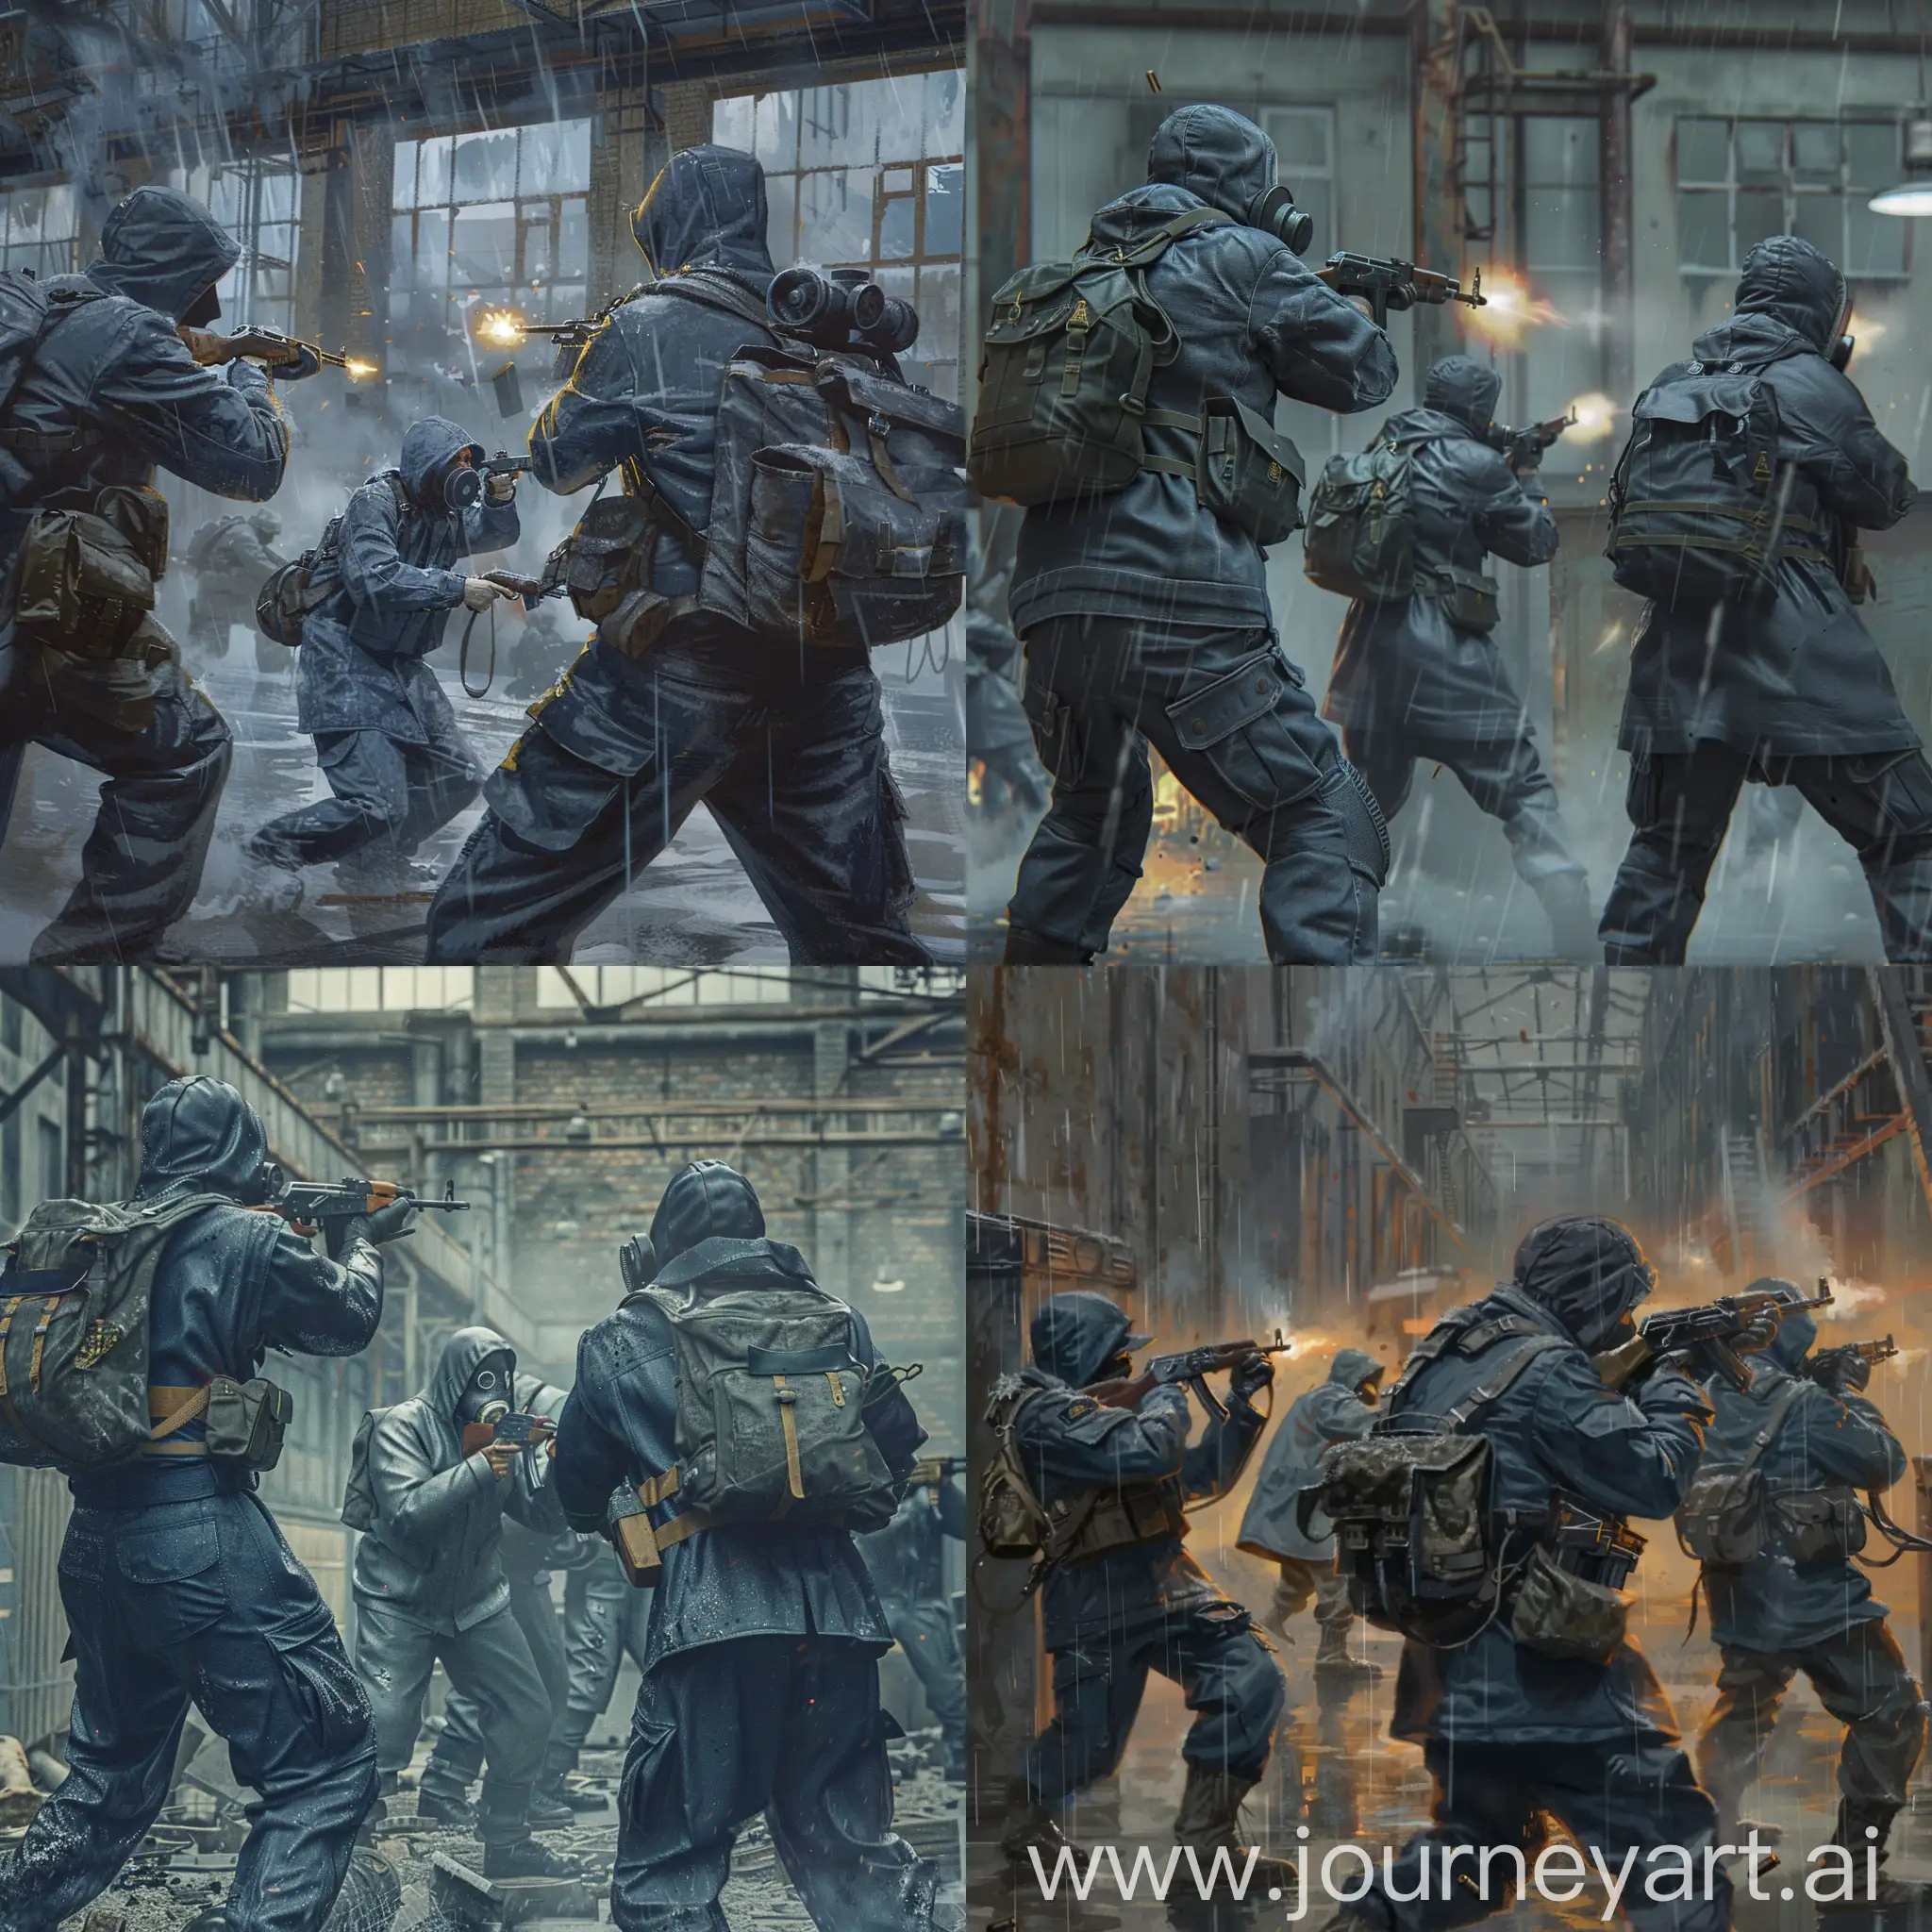 A group of 3 mercenaries dressed in dark blue overalls, gray military gear, gas masks, a small military backpack on their back, with rifles in their hands, shooting back at bandits in hiding, bandits dressed in gray raincoats and balaclavas, bandits in their hands machine guns, the action unfolds inside an abandoned Soviet factory.